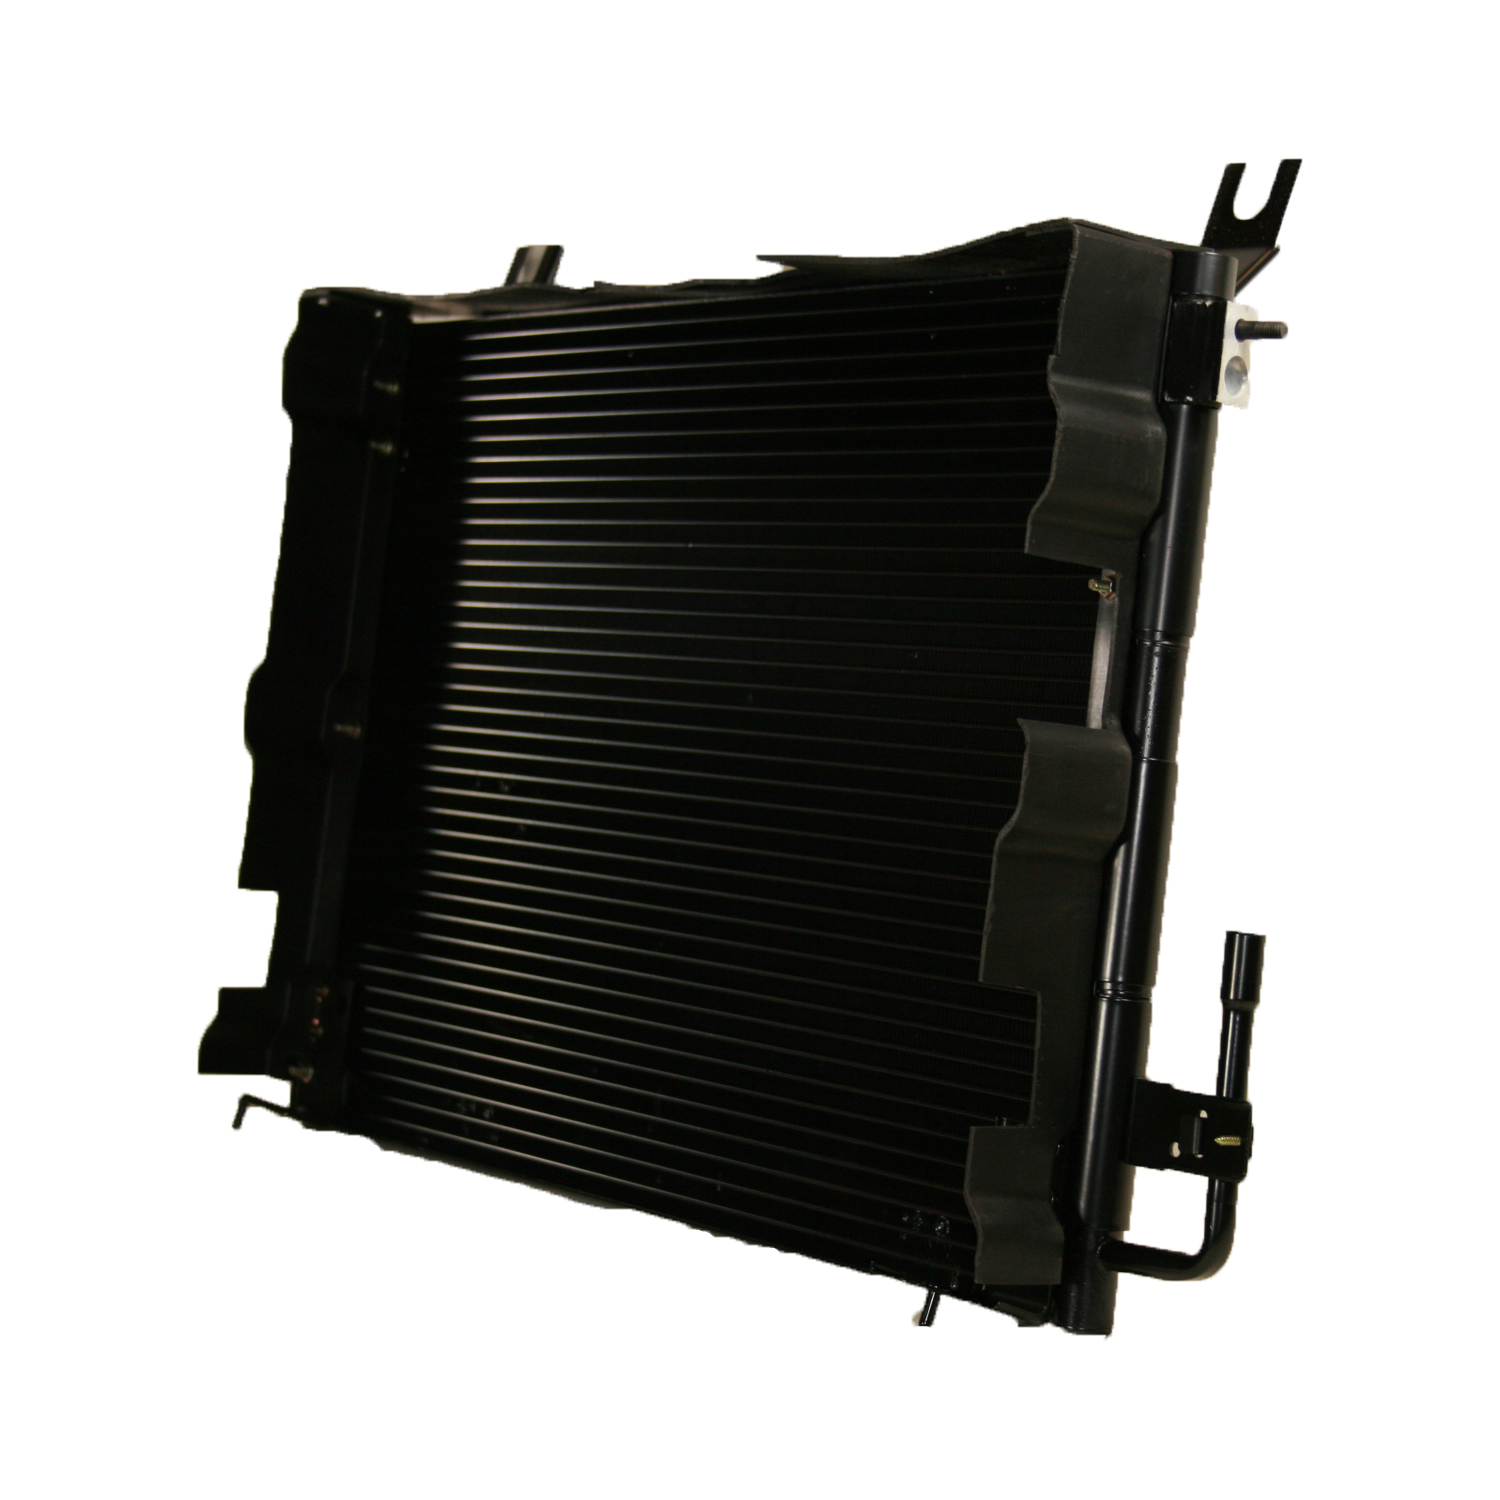 TCW Condenser 44-3016 New Product Image field_60b6a13a6e67c